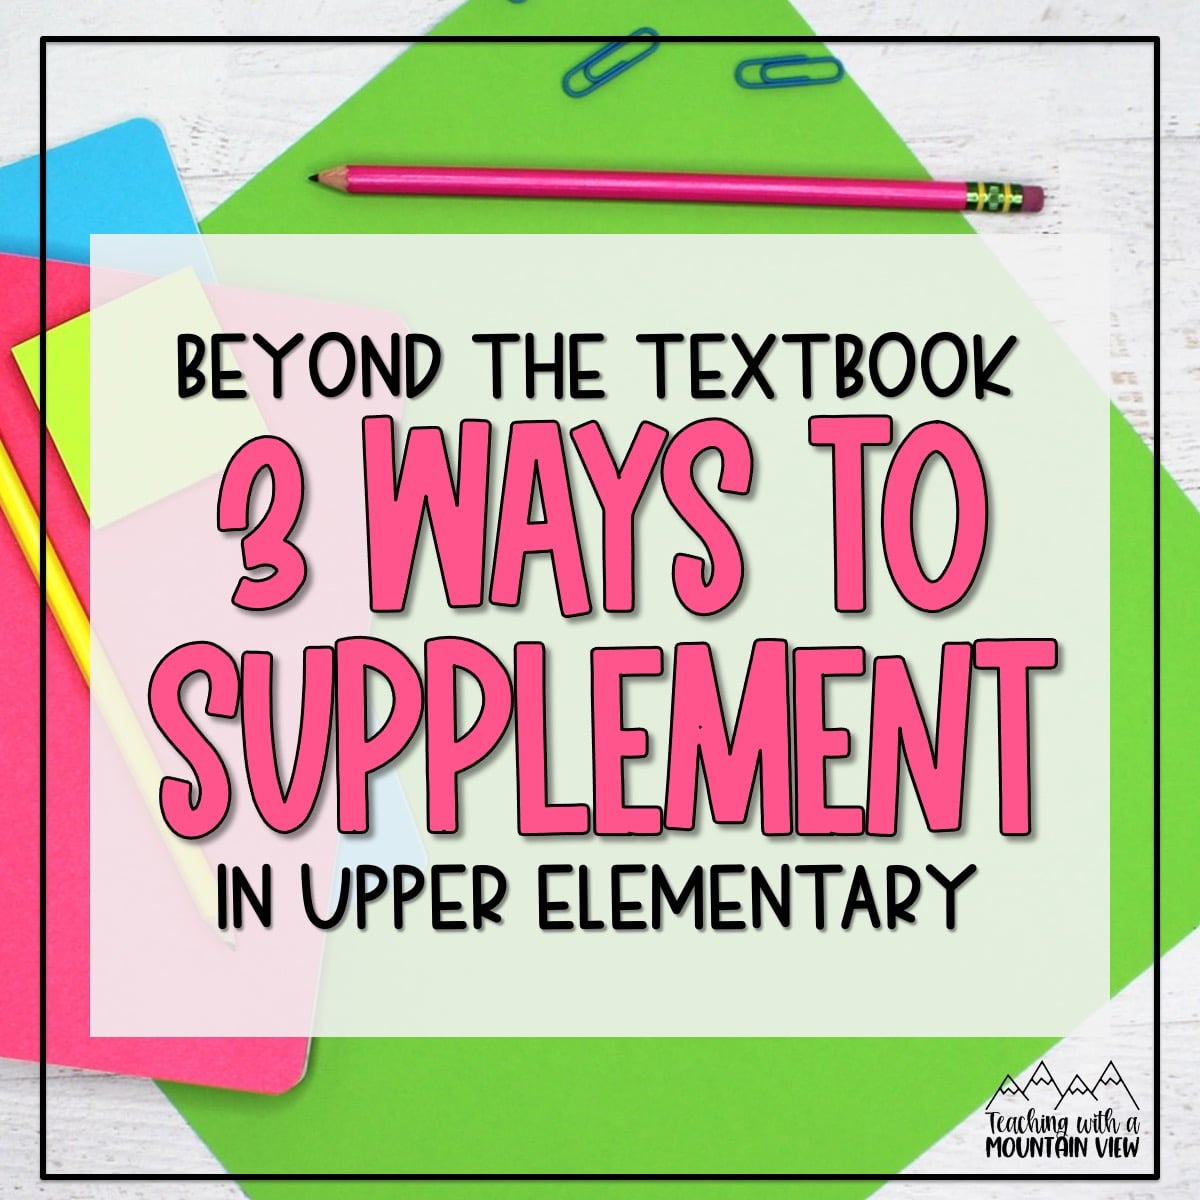 Three ways to supplement textbooks in upper elementary to provide engaging instruction and meet all students' needs.